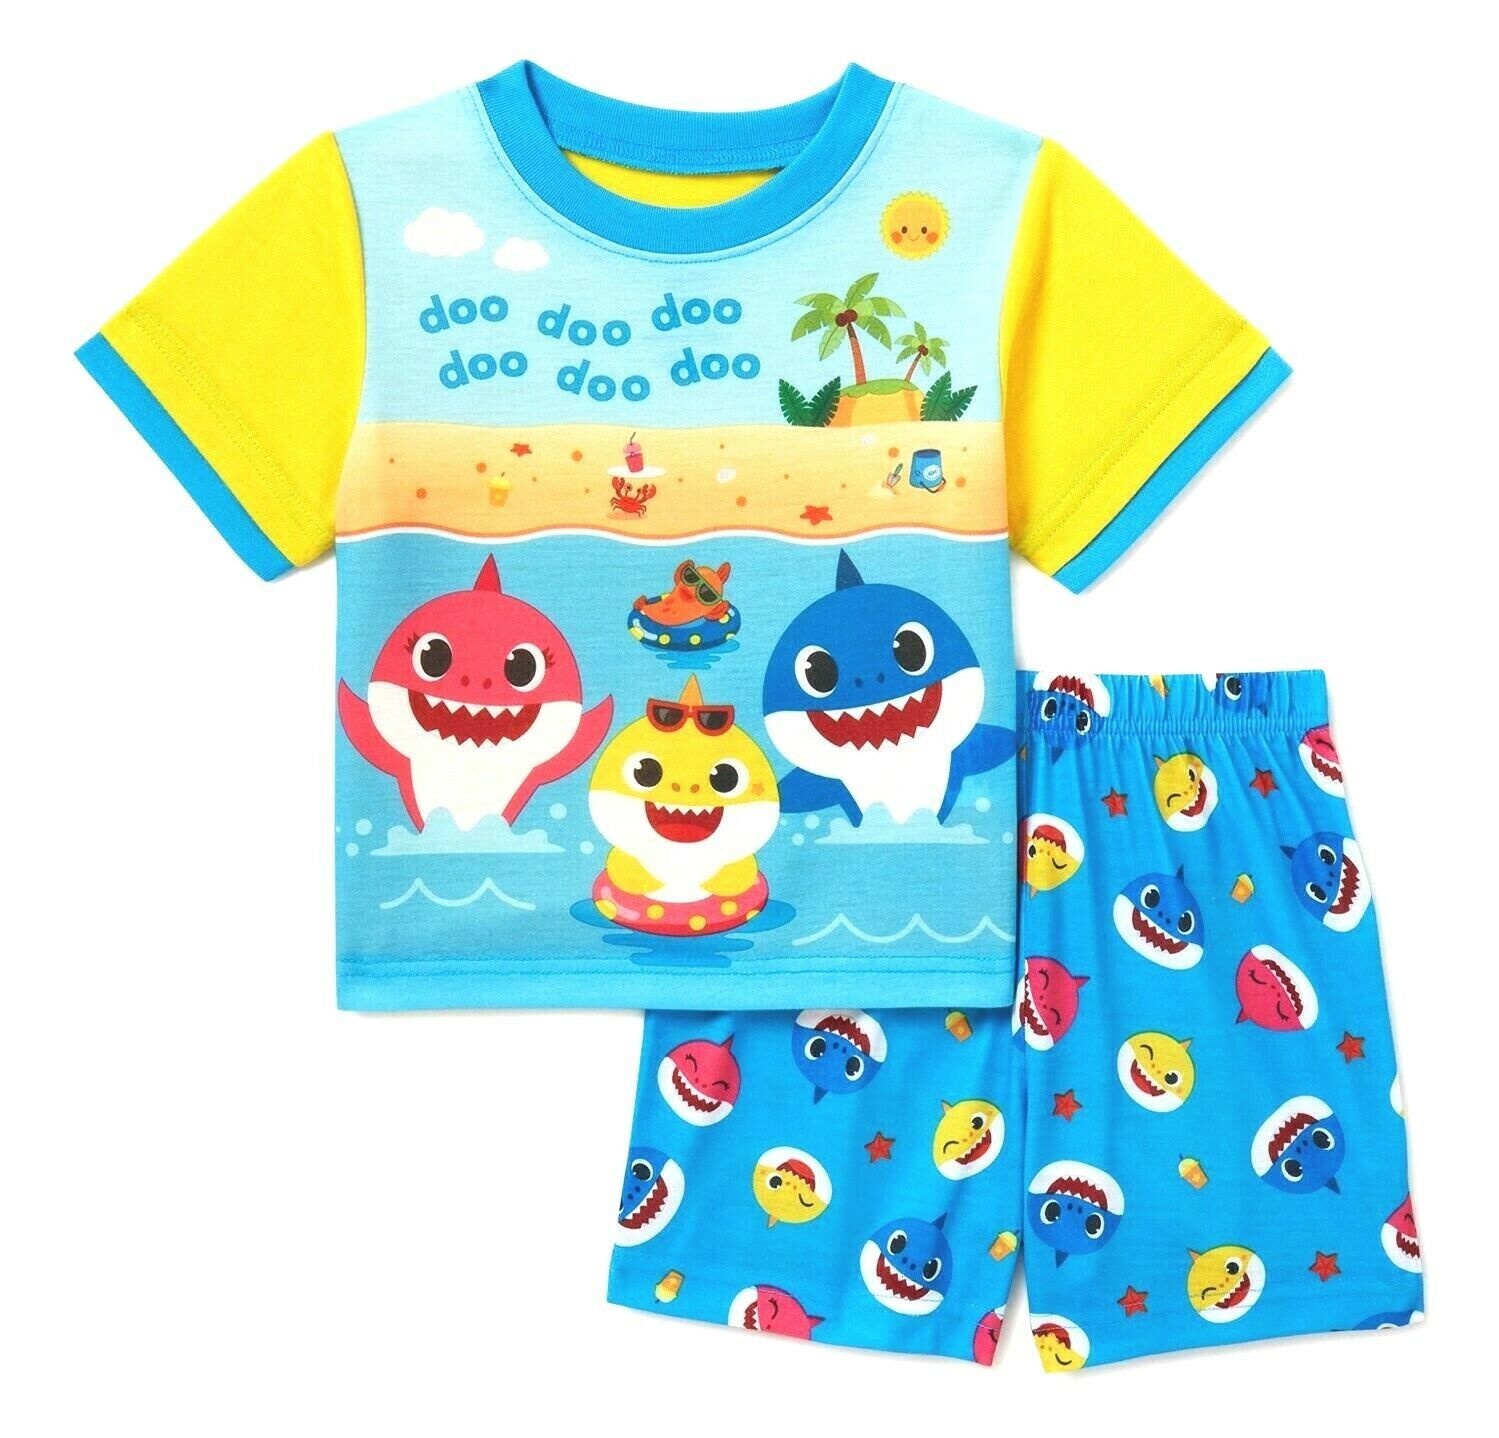 BABY SHARK MOMMY DADDY Pajamas Sleepwear Set Toddler's NWT Size 3T, 4T or 5T